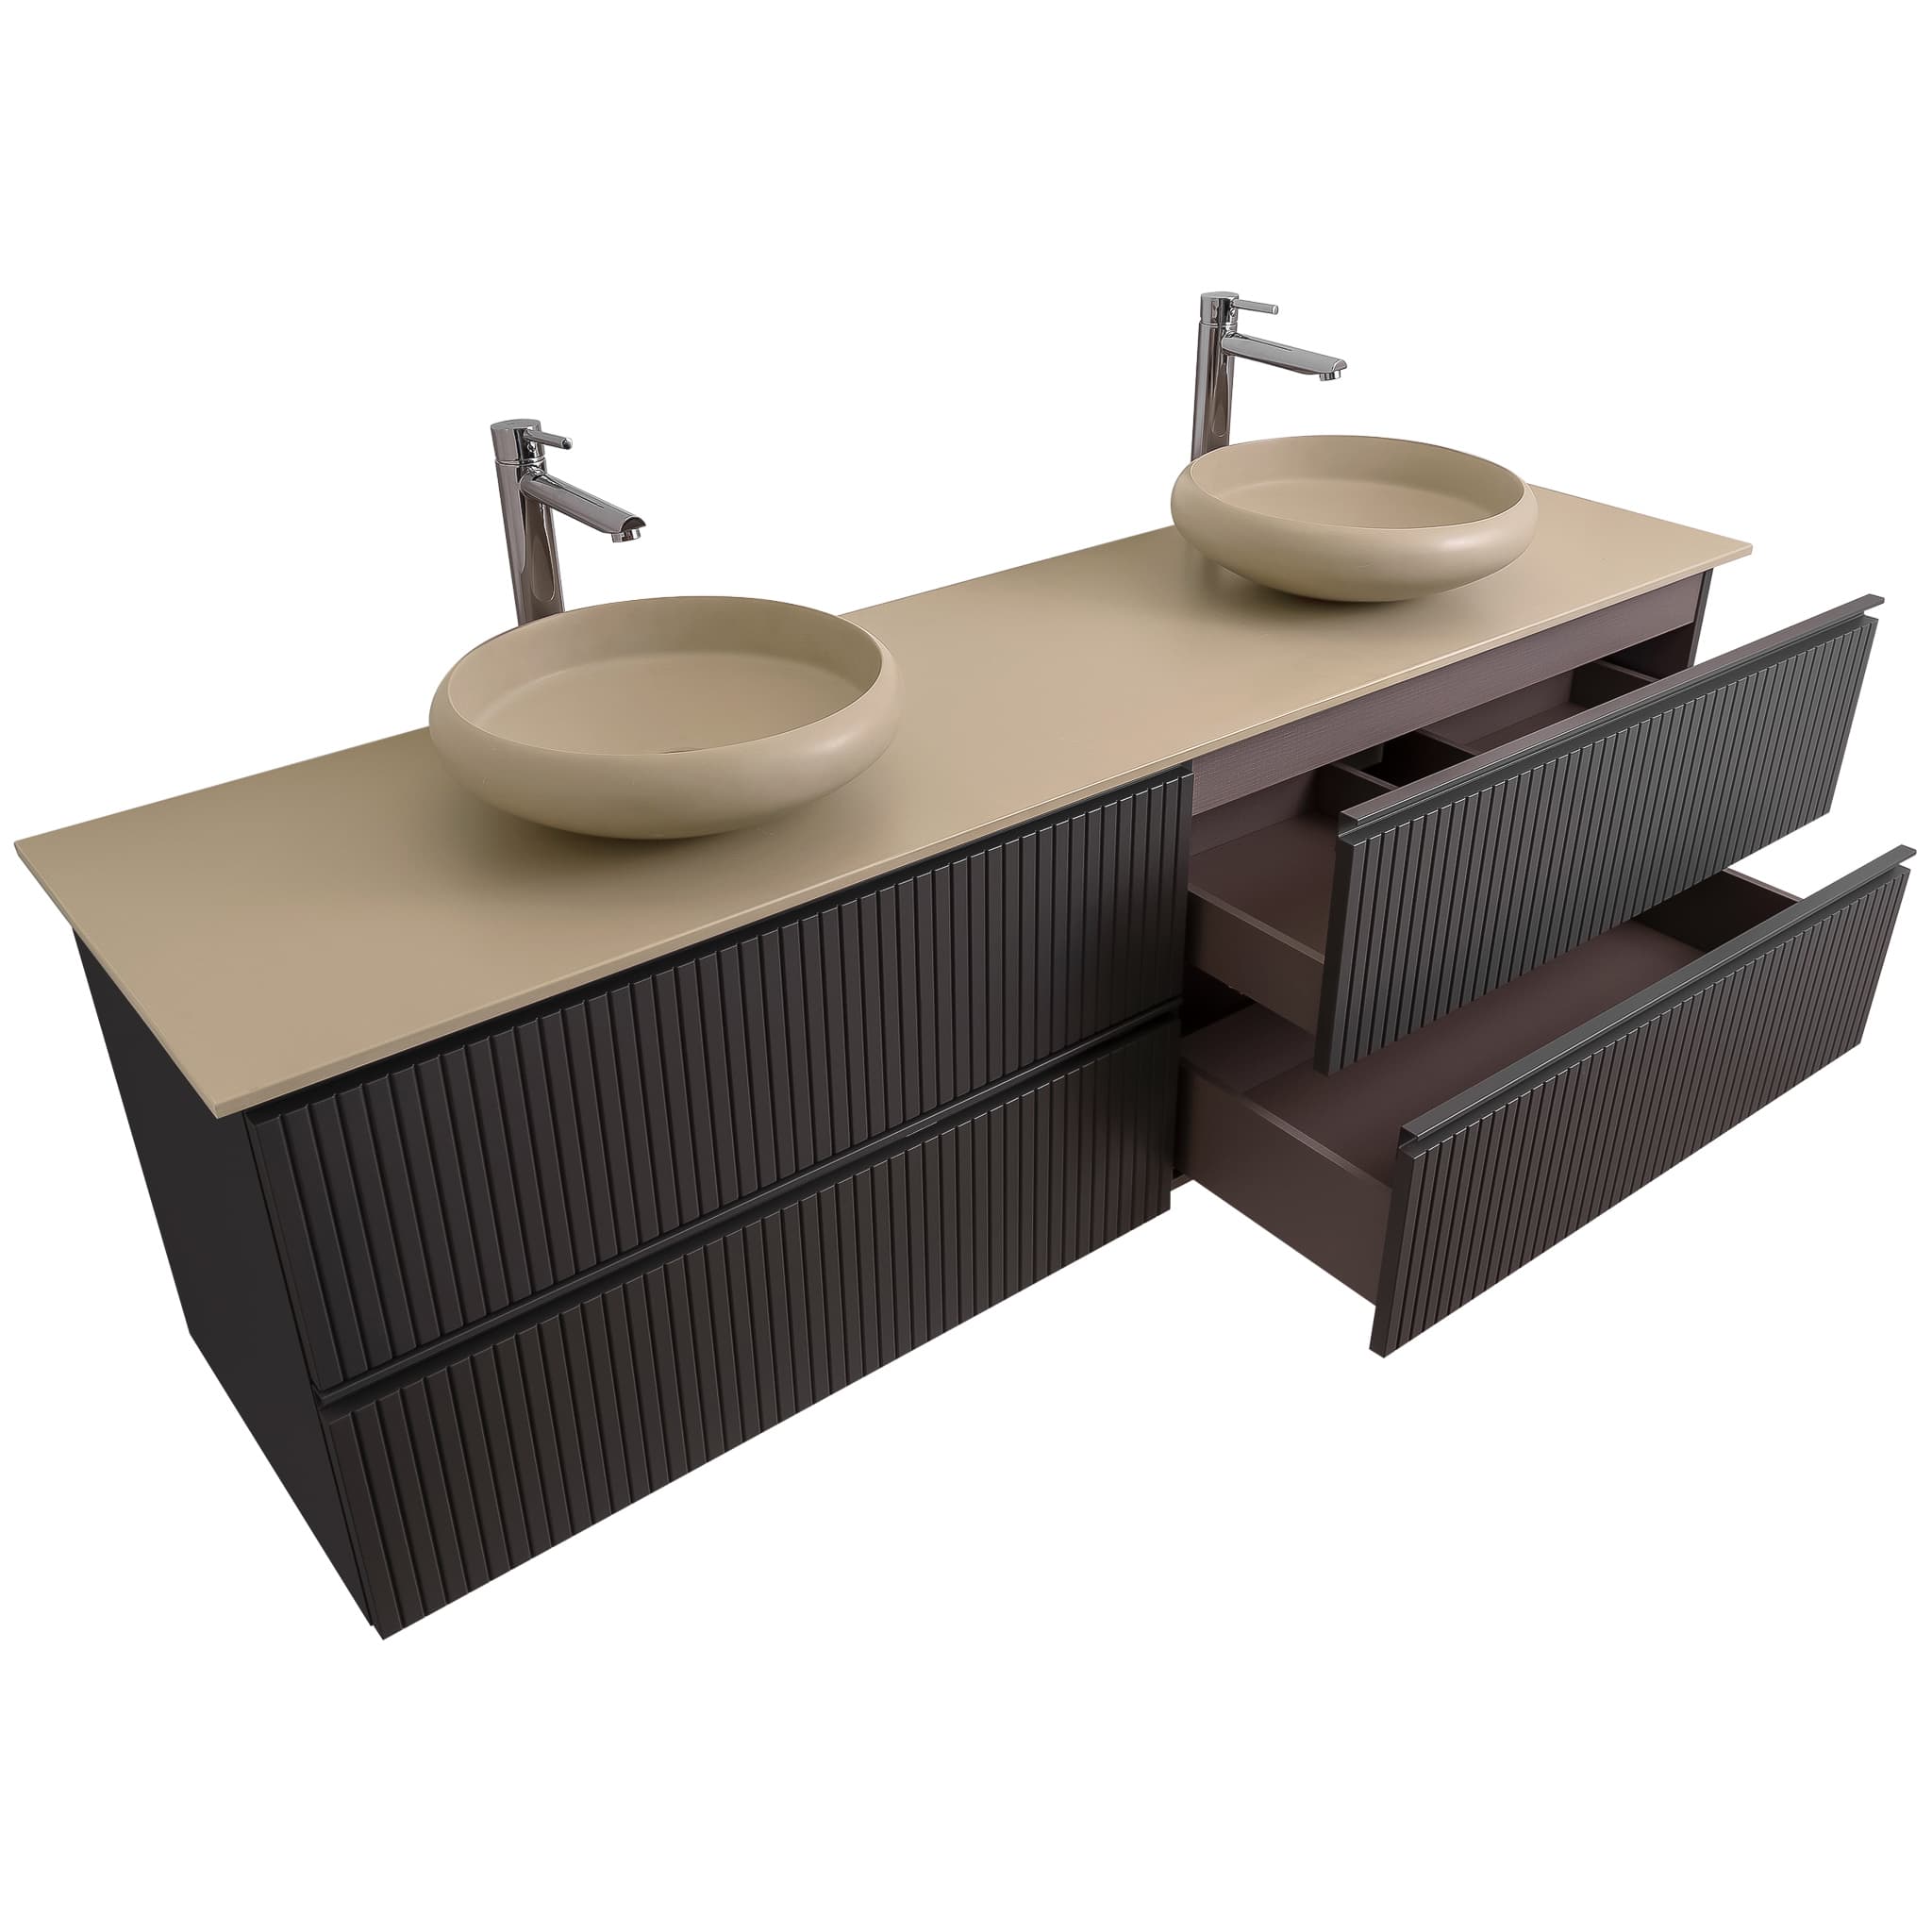 Ares 63 Matte Grey Cabinet, Solid Surface Flat Taupe Counter And Two Round Solid Surface Taupe Basin 1153, Wall Mounted Modern Vanity Set